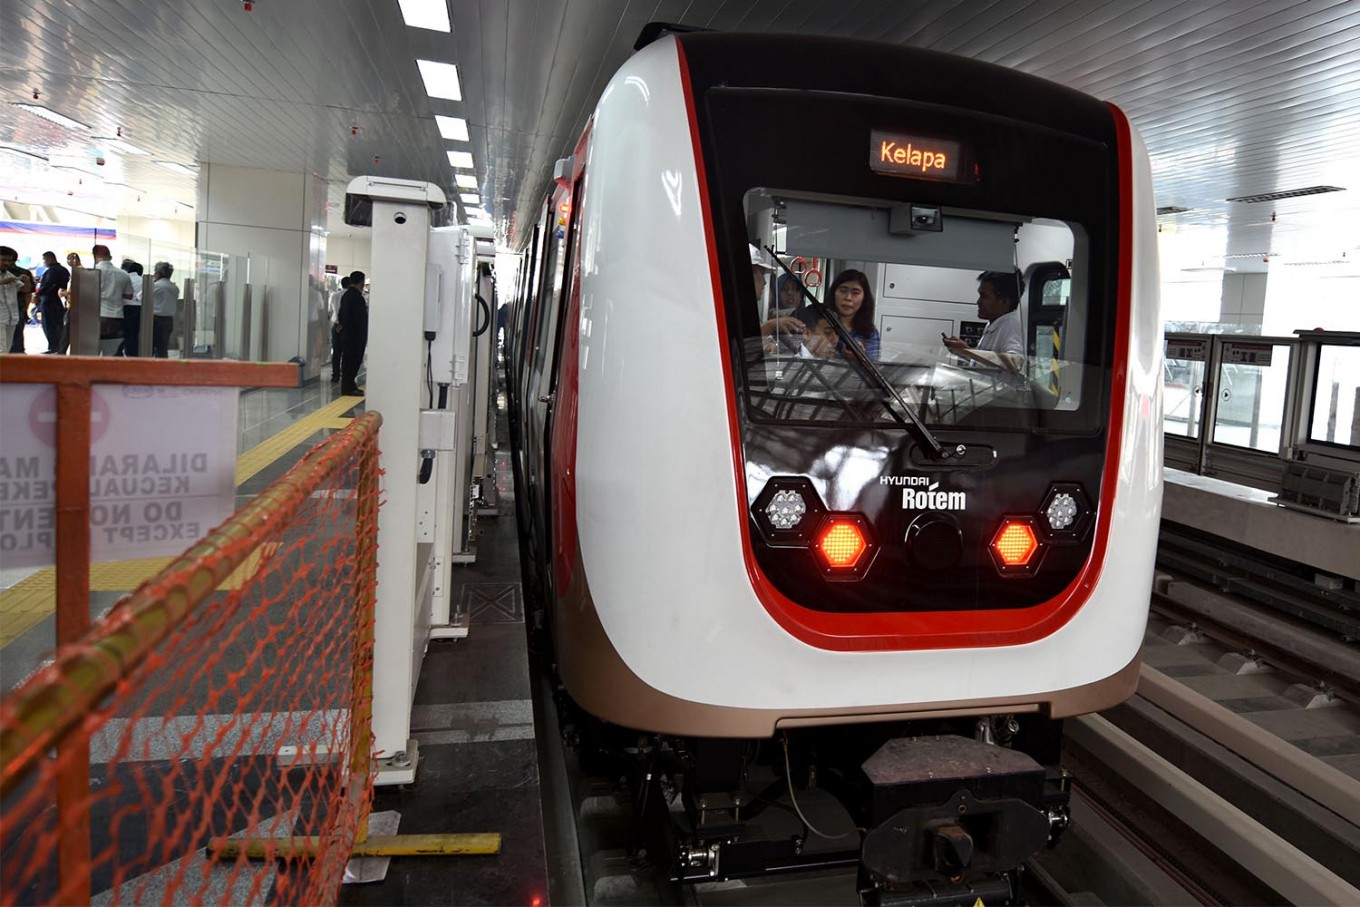 Jakarta LRT to operate in early 2019: Anies - City - The Jakarta Post